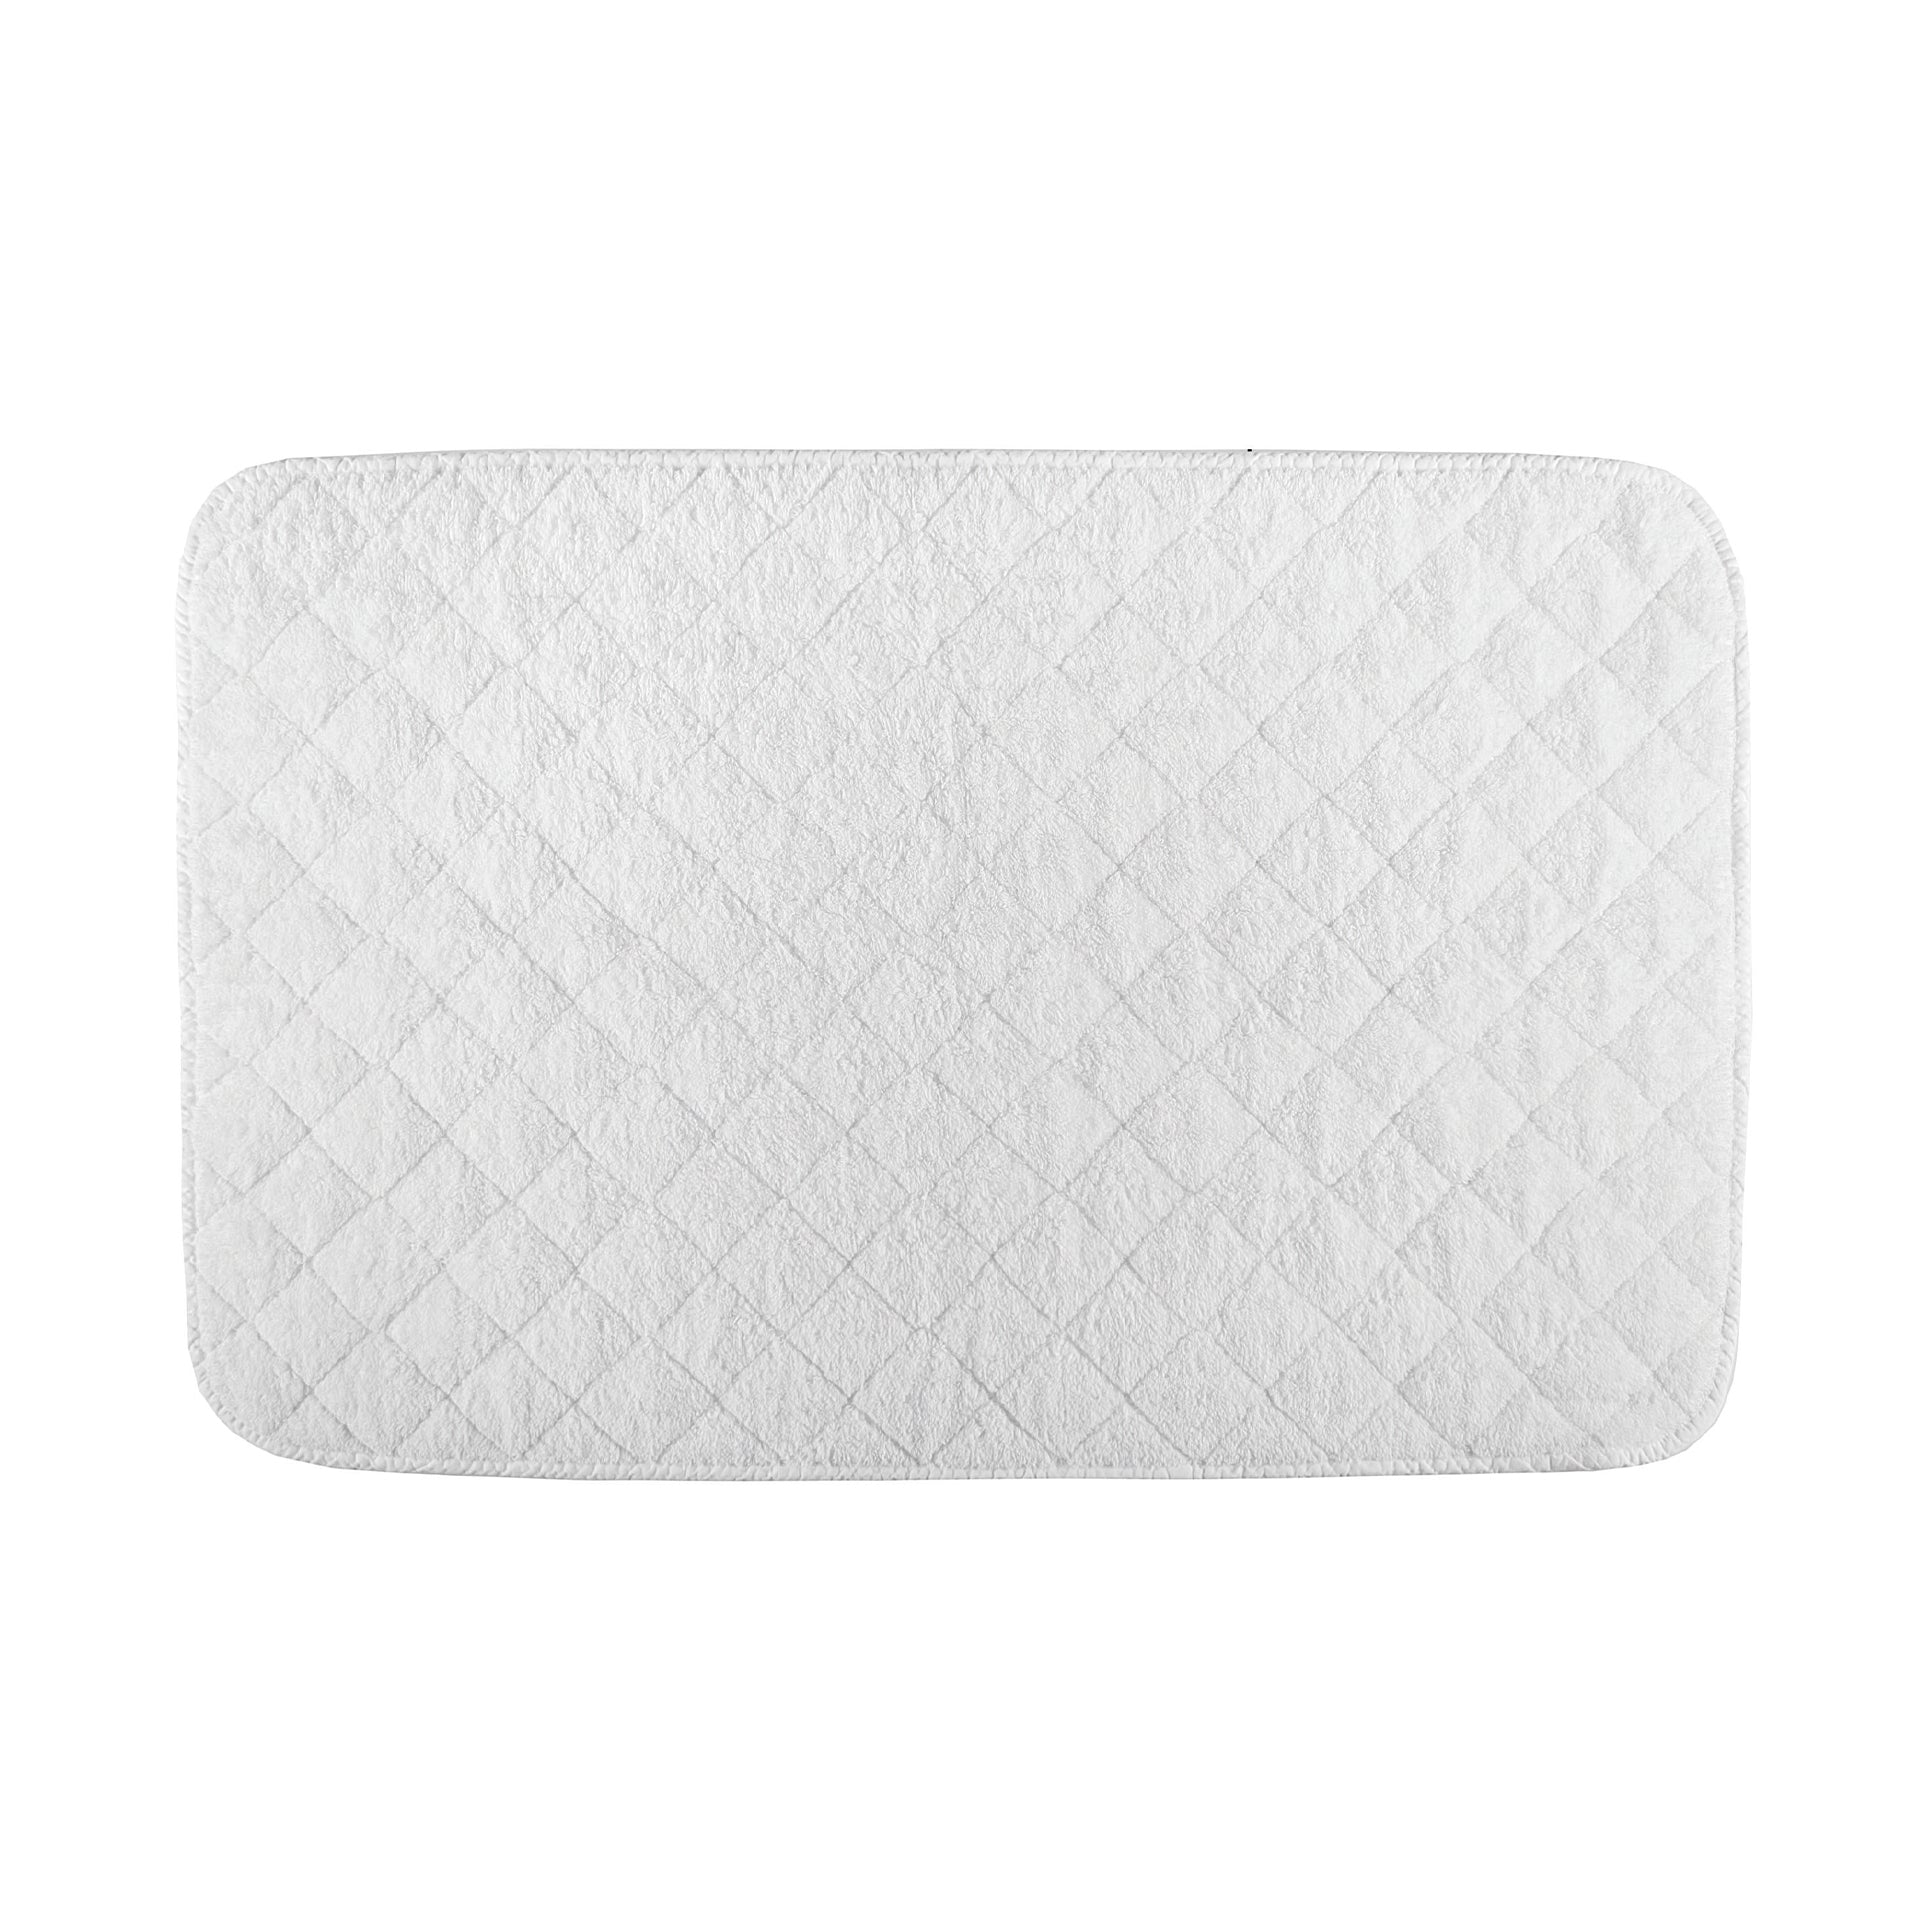 A beautiful quilted stitch and cotton binding complete this everyday essential. Offered in pure white.